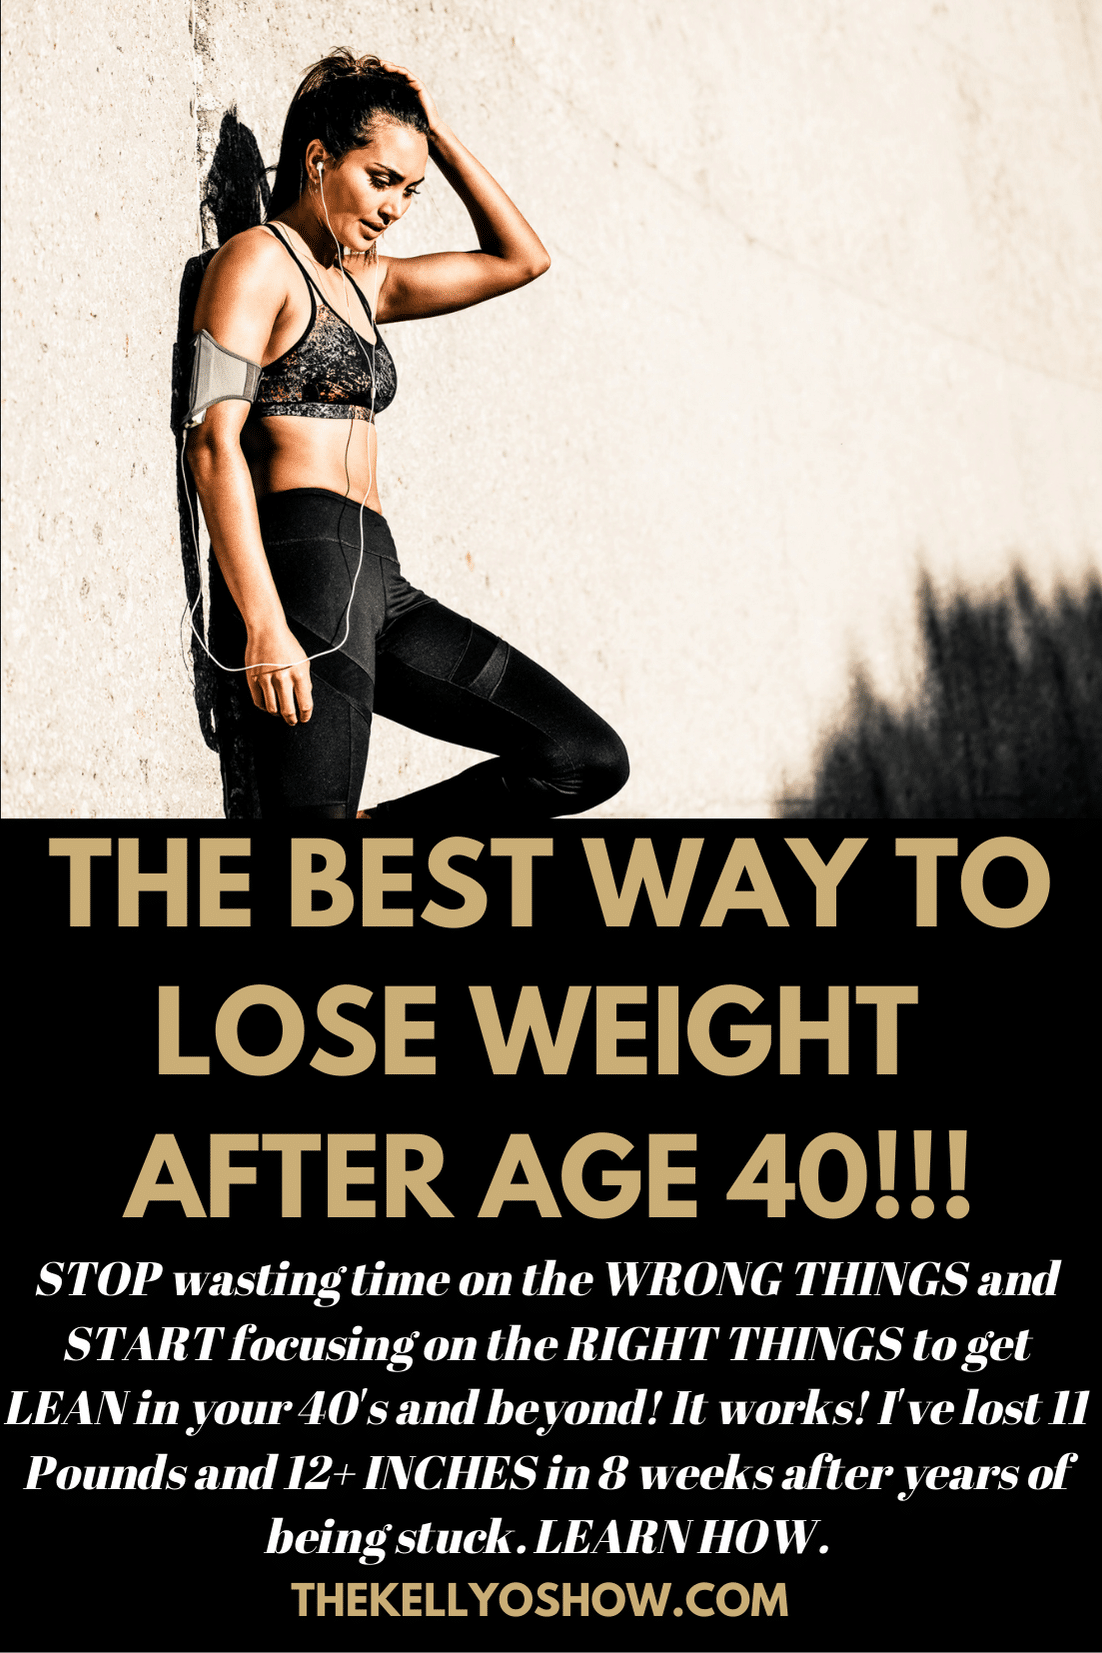 https://kellyolexa.com/wp-content/uploads/2021/07/best-way-to-lose-weight-after-40.png